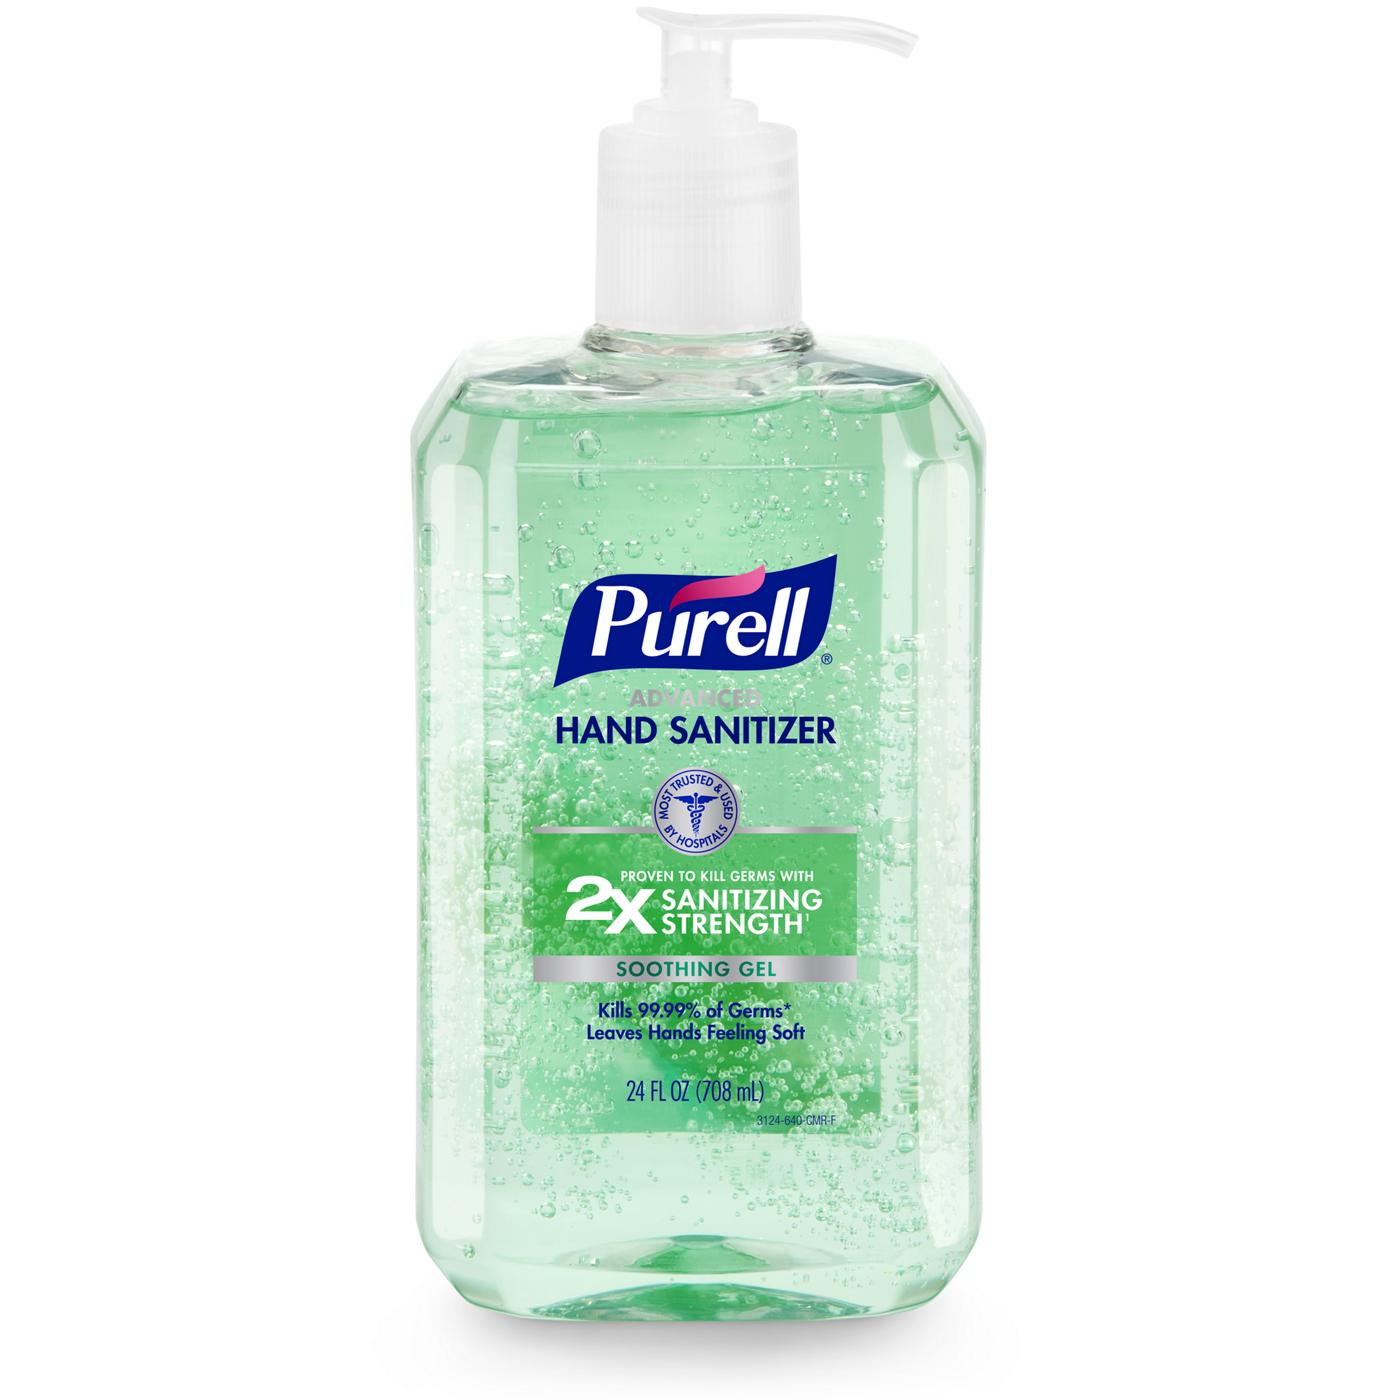 Purell Advanced Hand Sanitizer - Soothing Gel; image 1 of 4